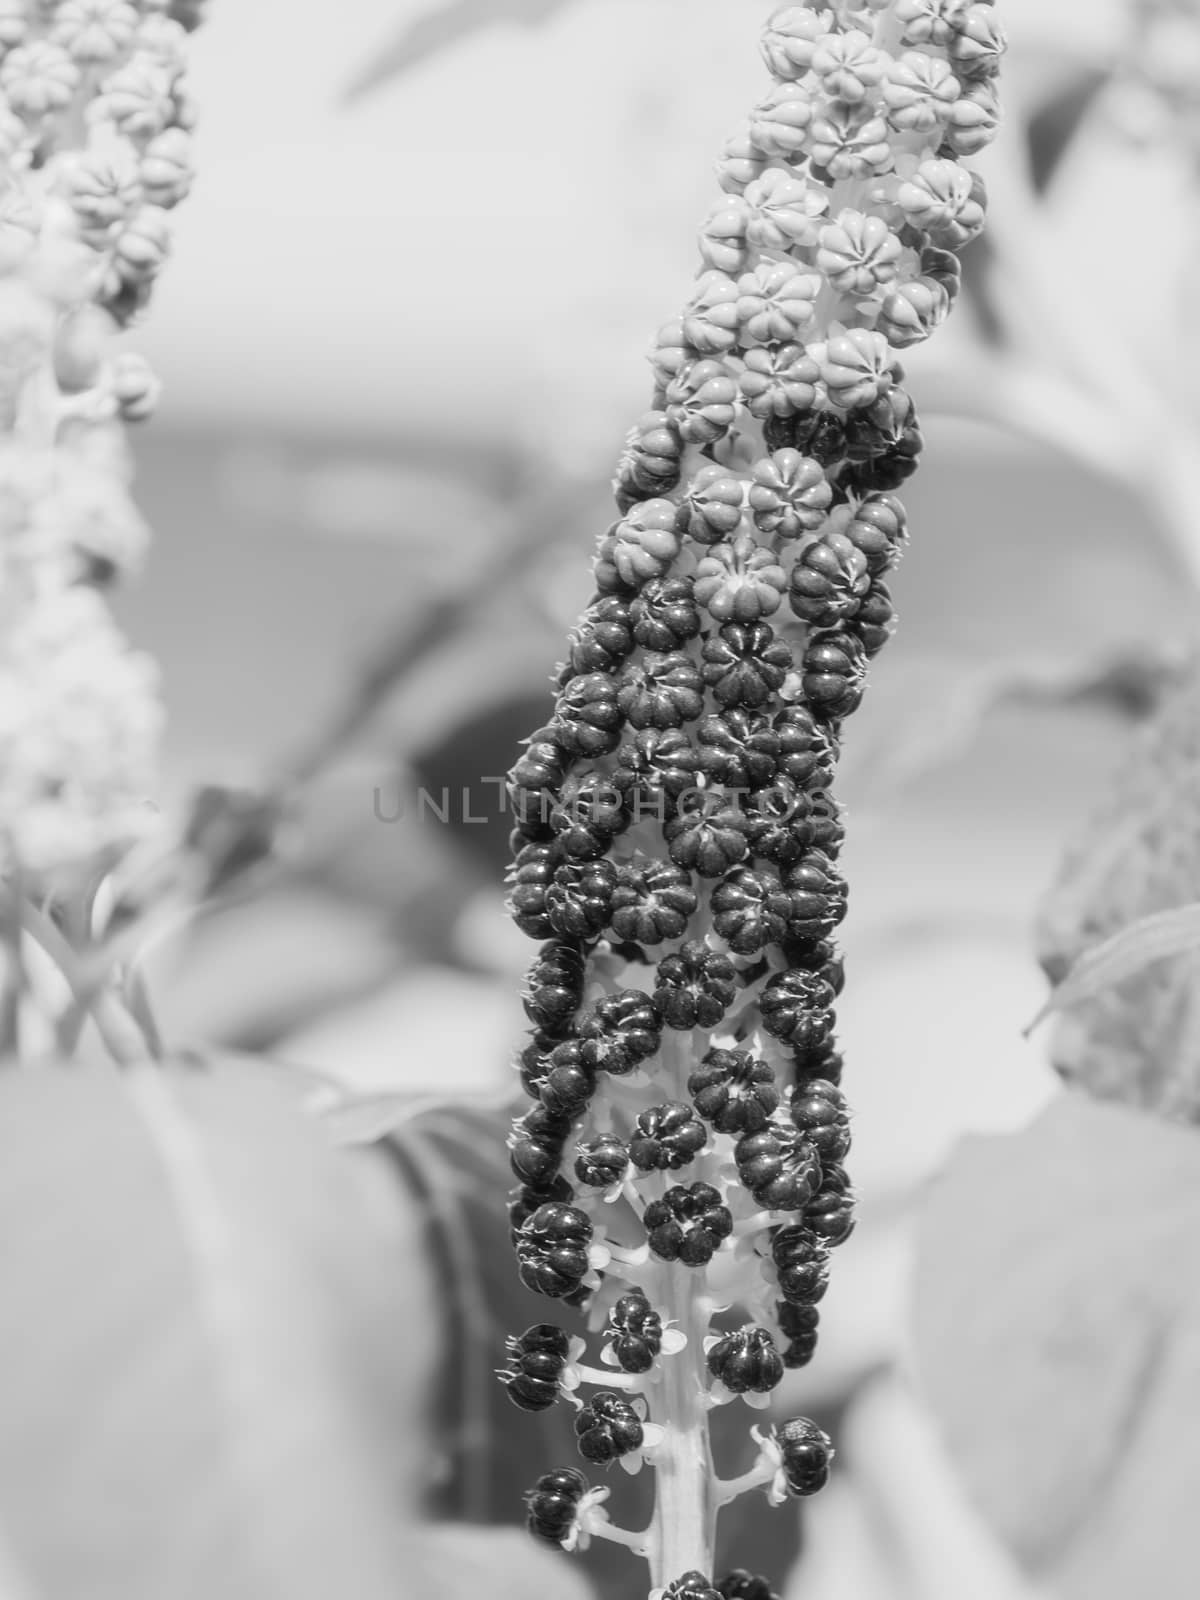 Indian pokeweed (Phytolacca acinosa). Plant has antiasthmatic, antifungal, expectorant, antibacterial and laxative properties. Black and white photo